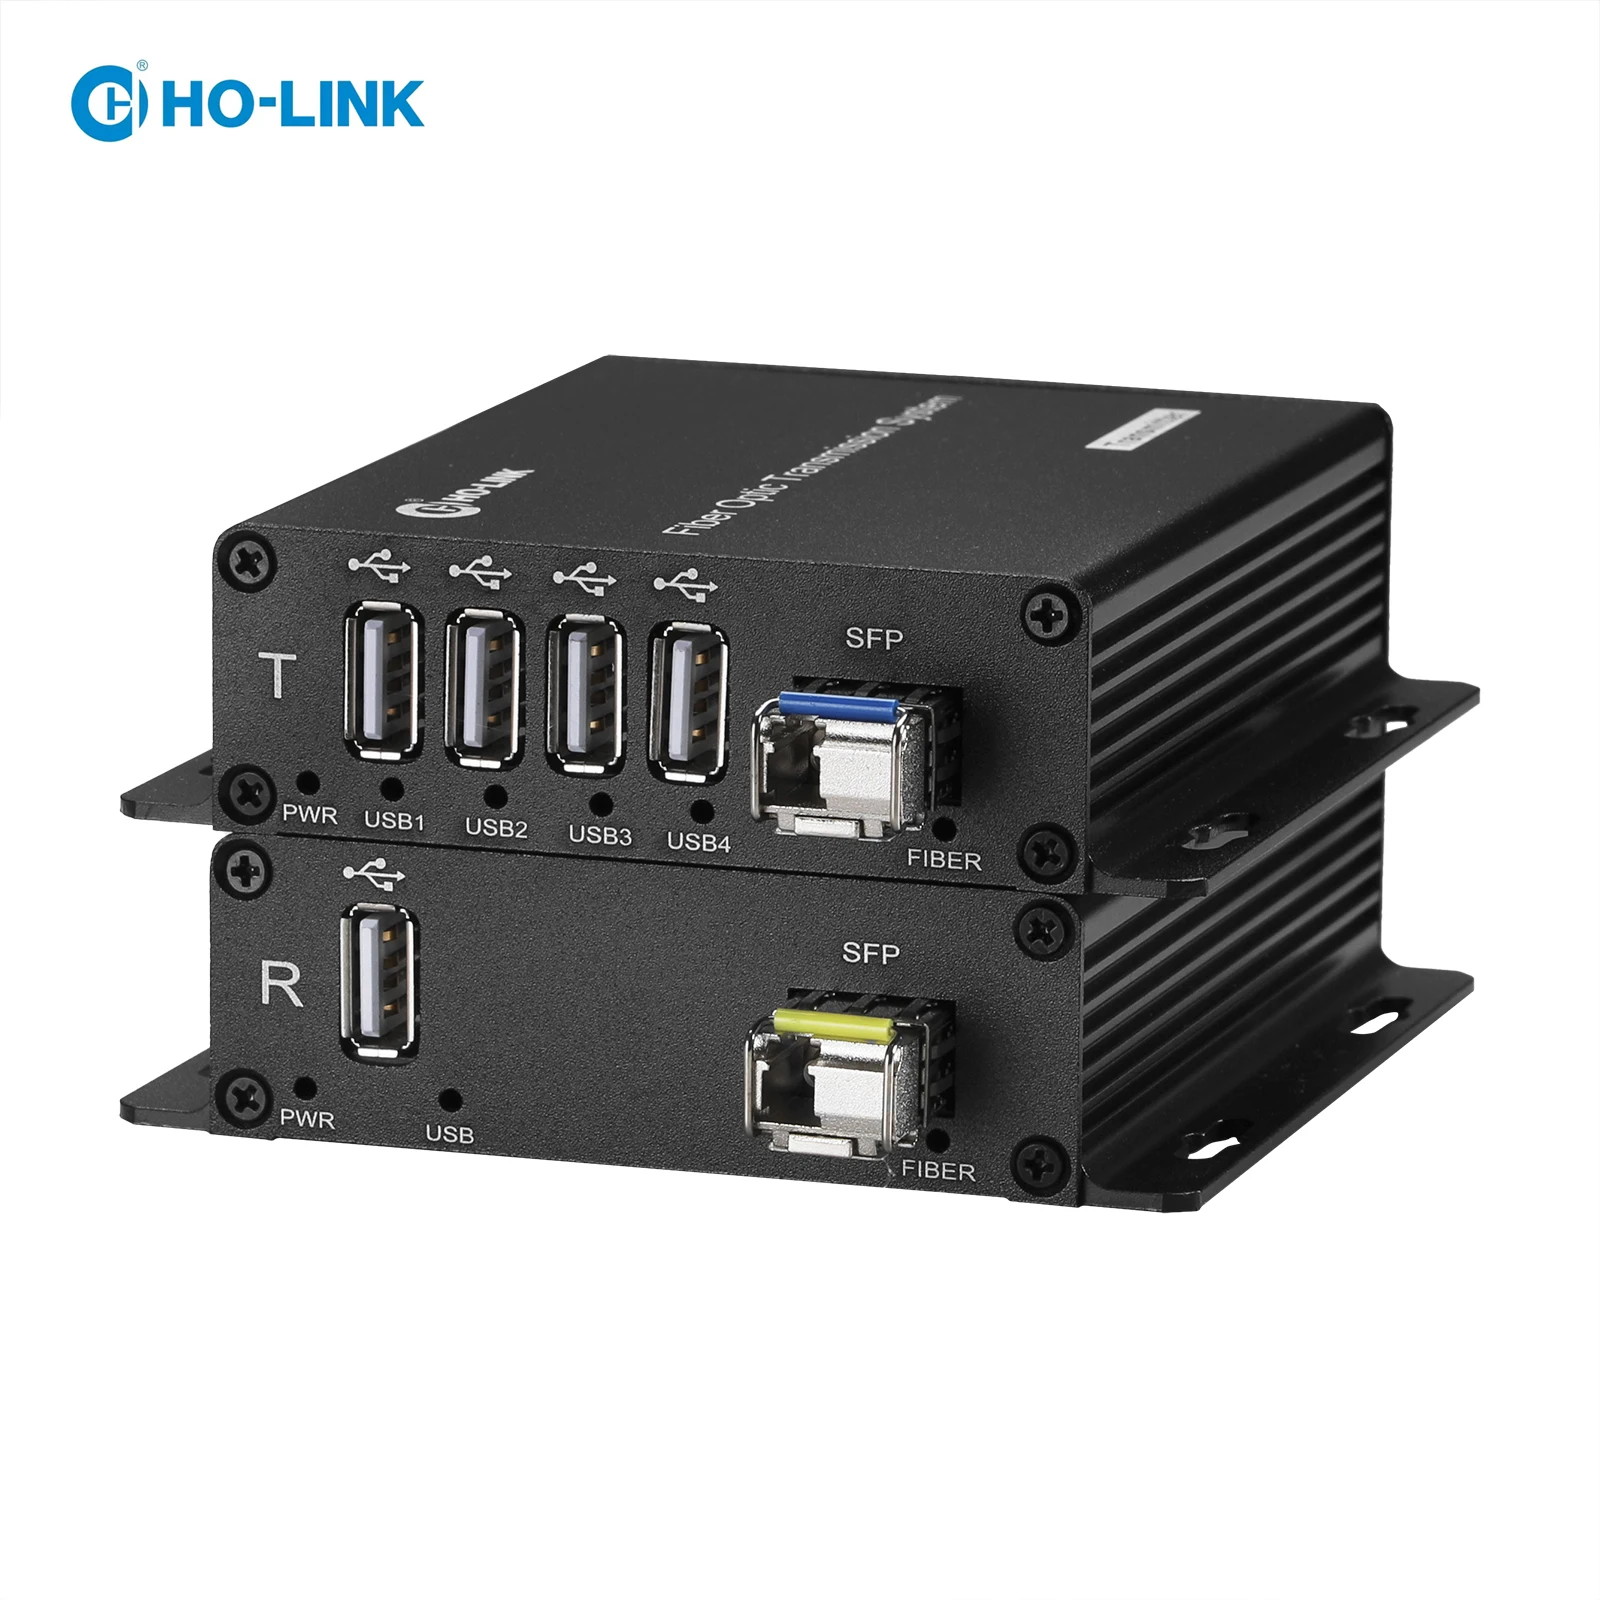 

USB 2.0 Hub Fiber Optic Extender to Max 250 Meters with 10 Gbps SFP Module, USB 2.0 Splitter 1 to 4 Ports Over 1 Fibers